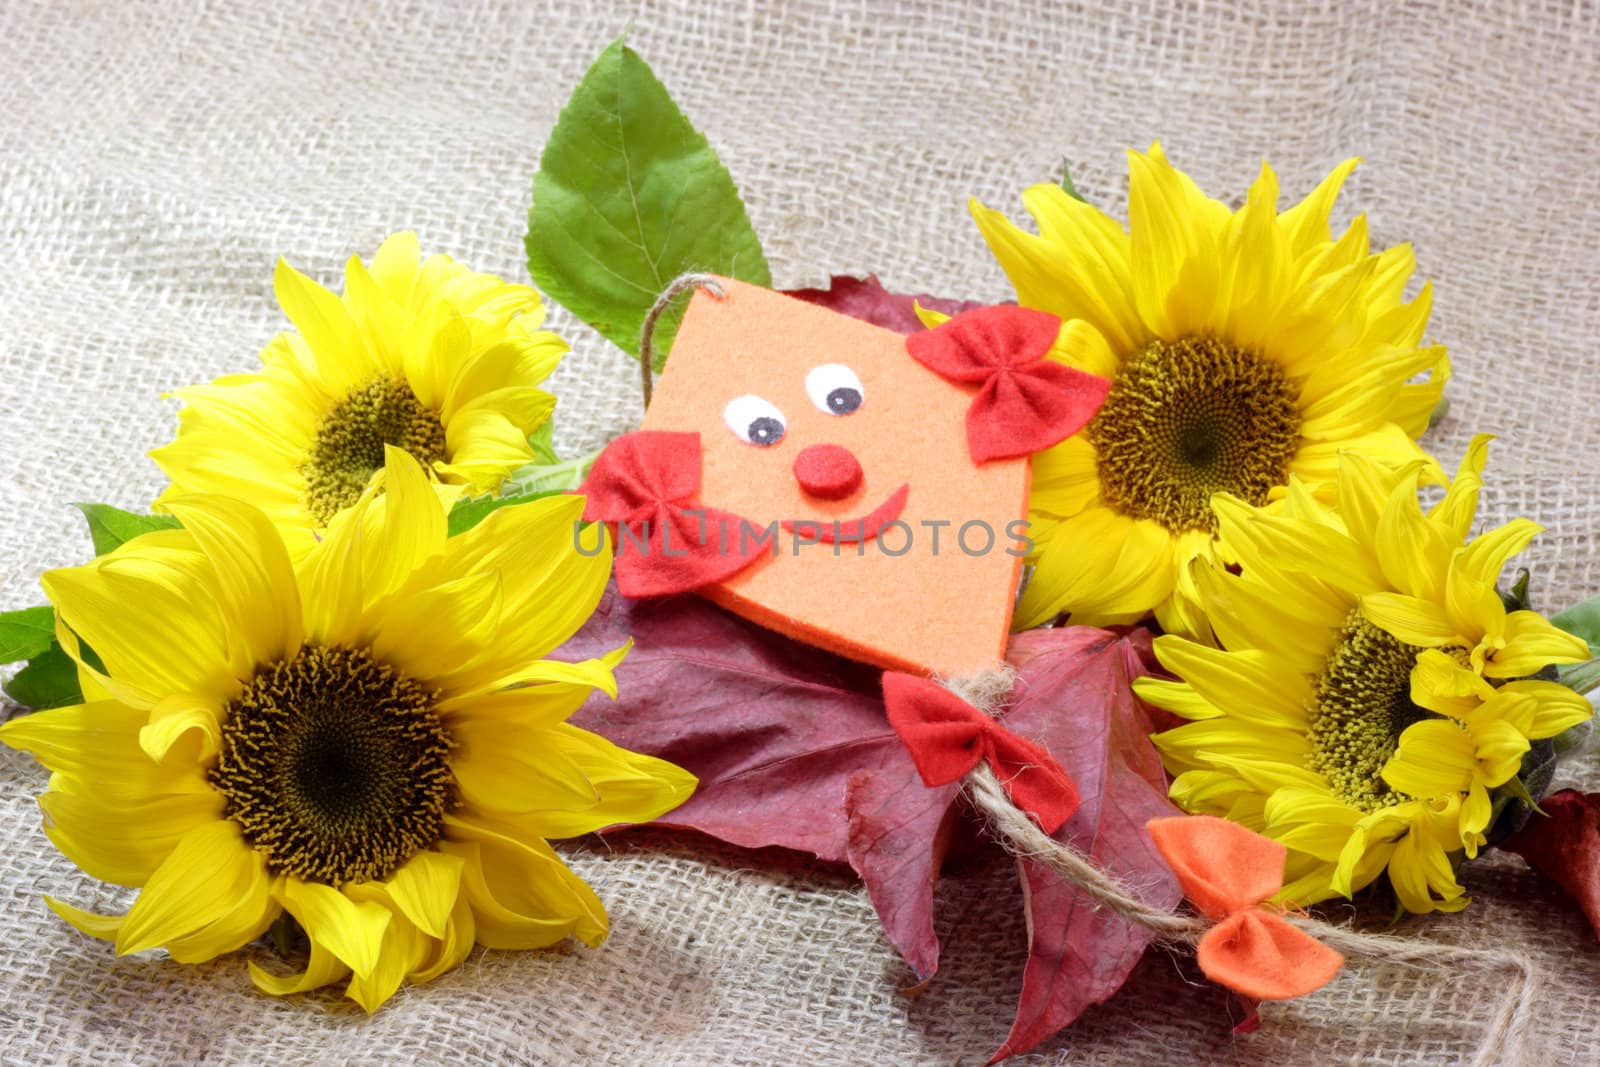 Sunflowers with autumn foliage and felt kite in a basket